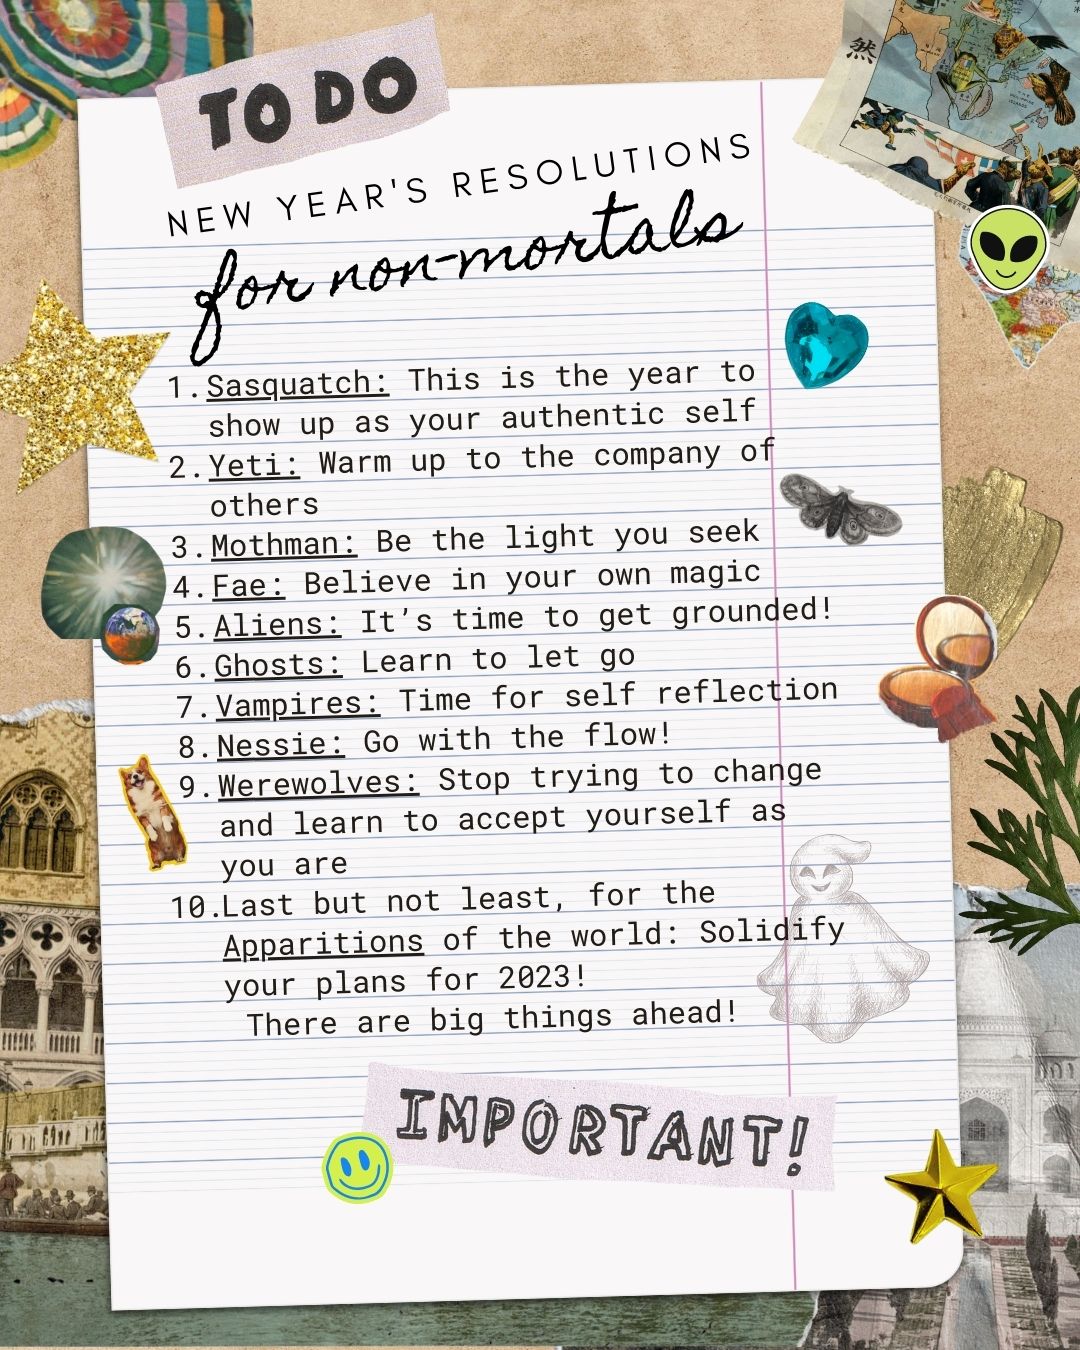 A notebook page that lists different types of cryptids and their new year's resolutions